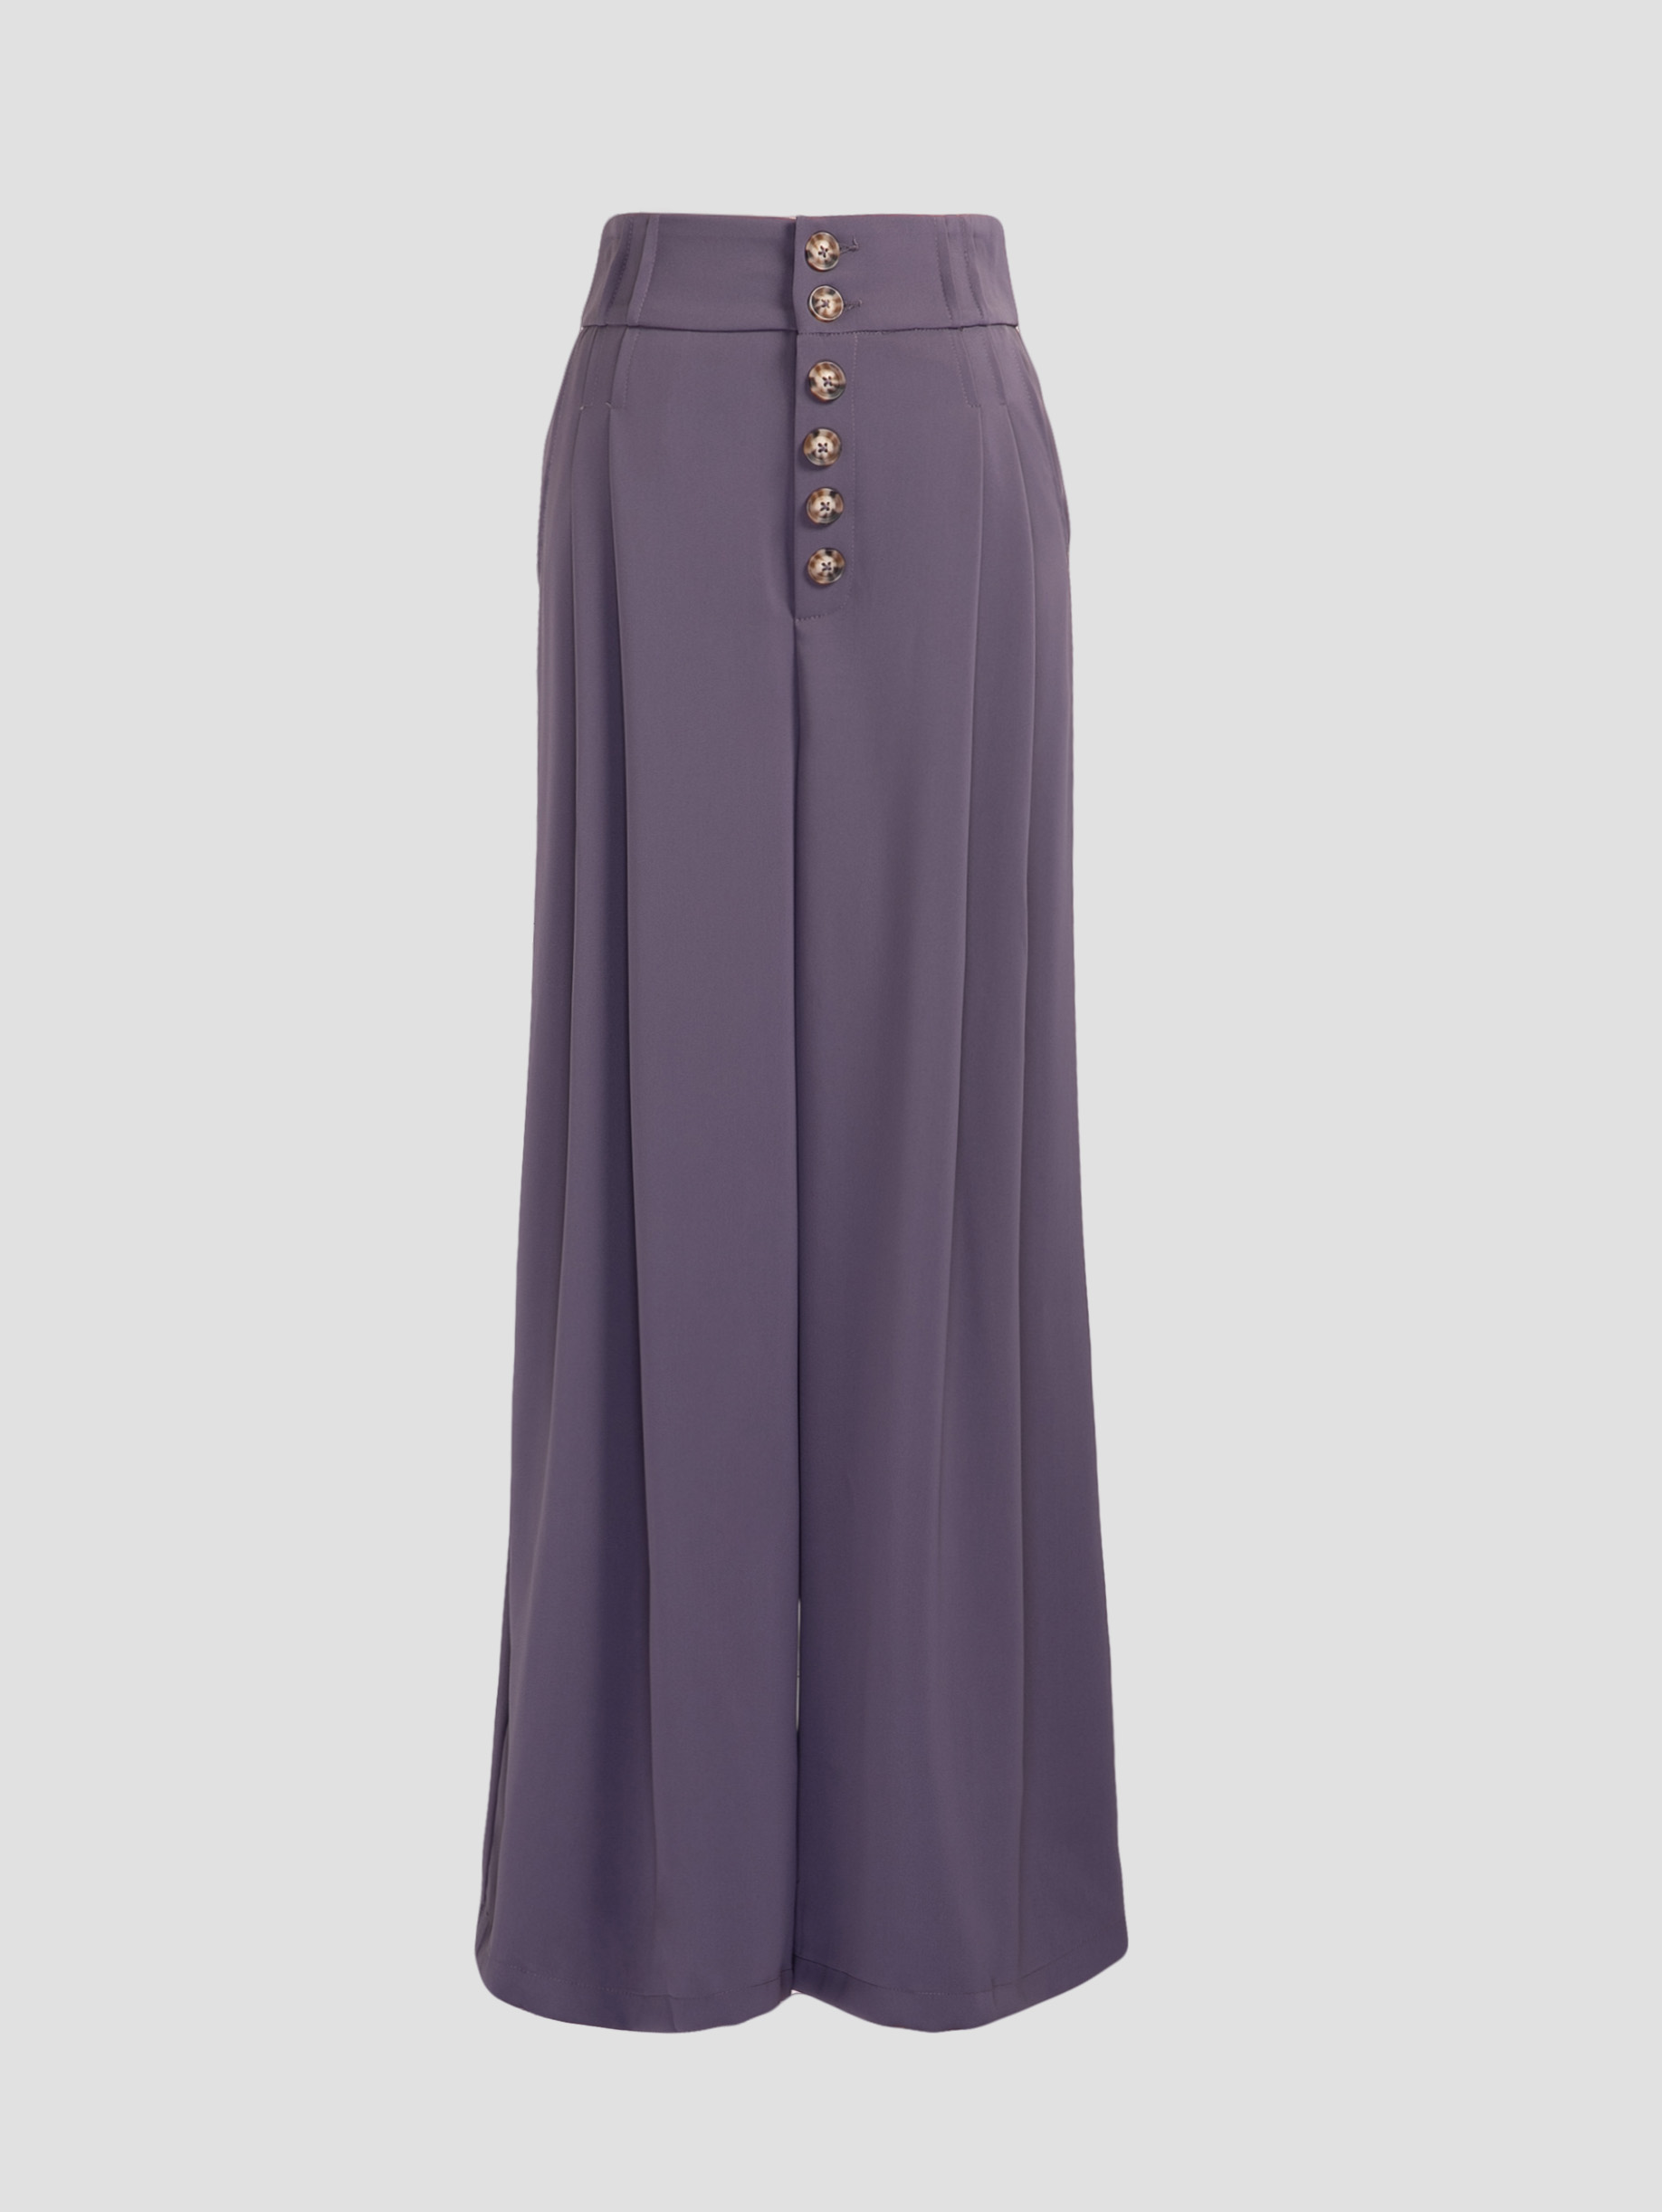 High Waist Front Breasted Button Wide Leg Long Pants 27737